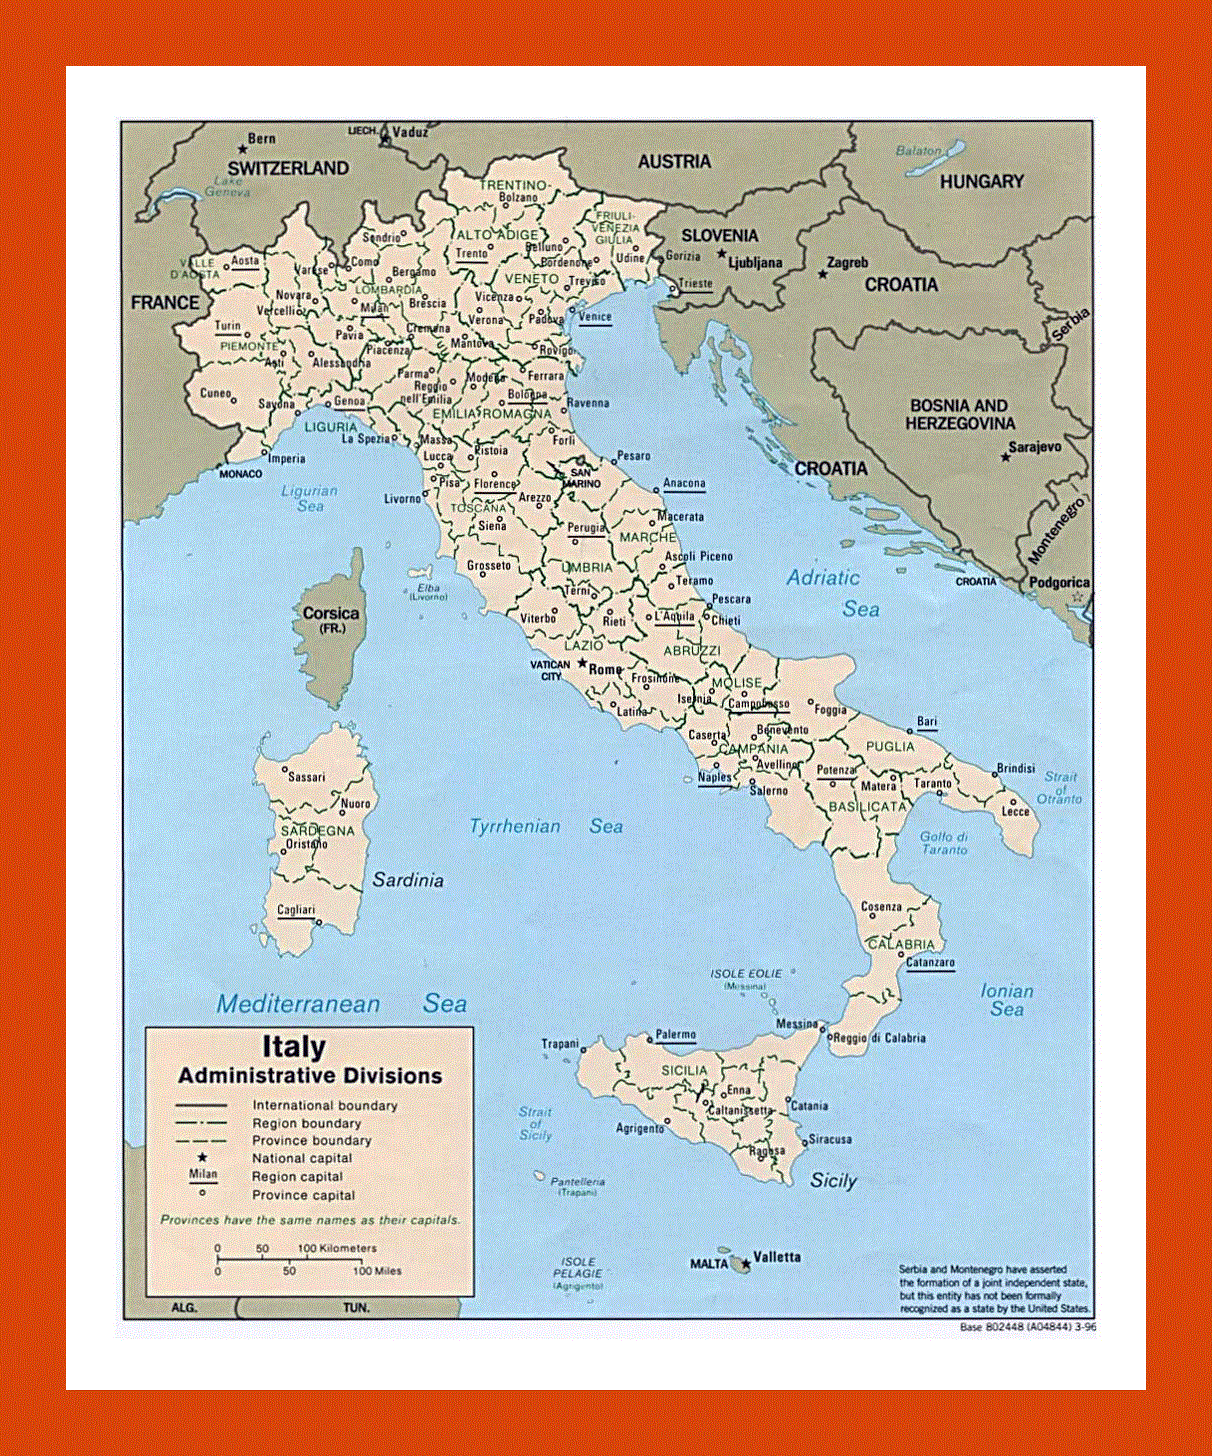 Administrative divisions map of Italy - 1996